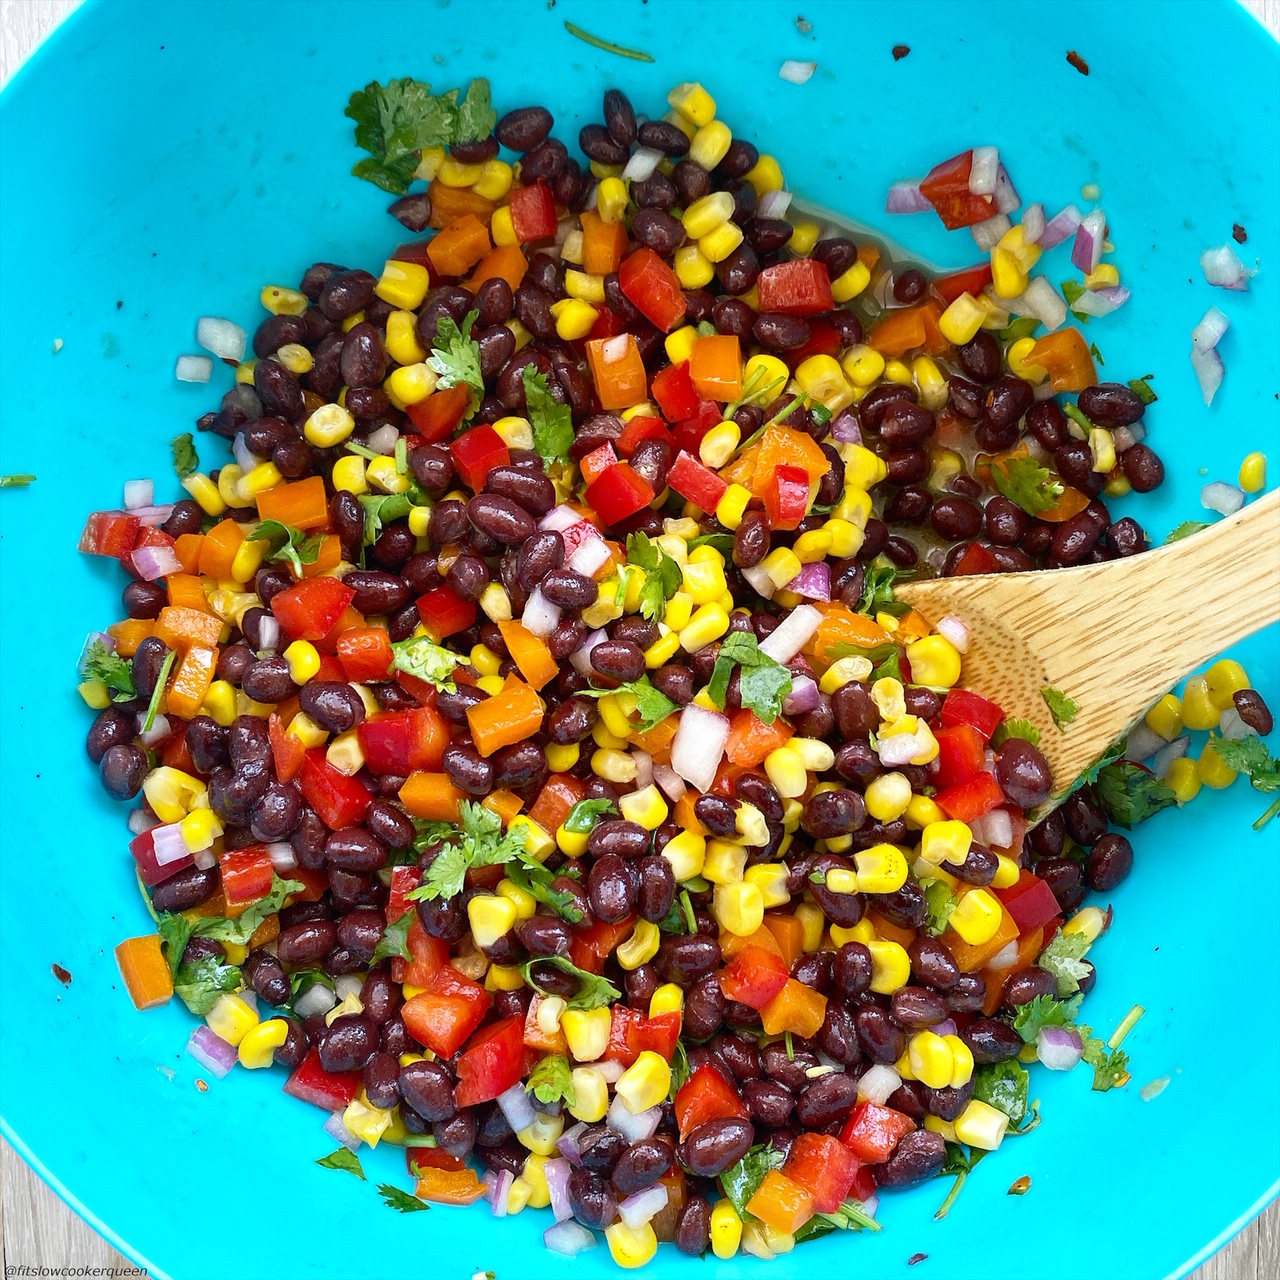 Mixed together in a large bowl: black beans, corn, diced orange bell pepper, diced red bell pepper, red onion, fresh cilantro